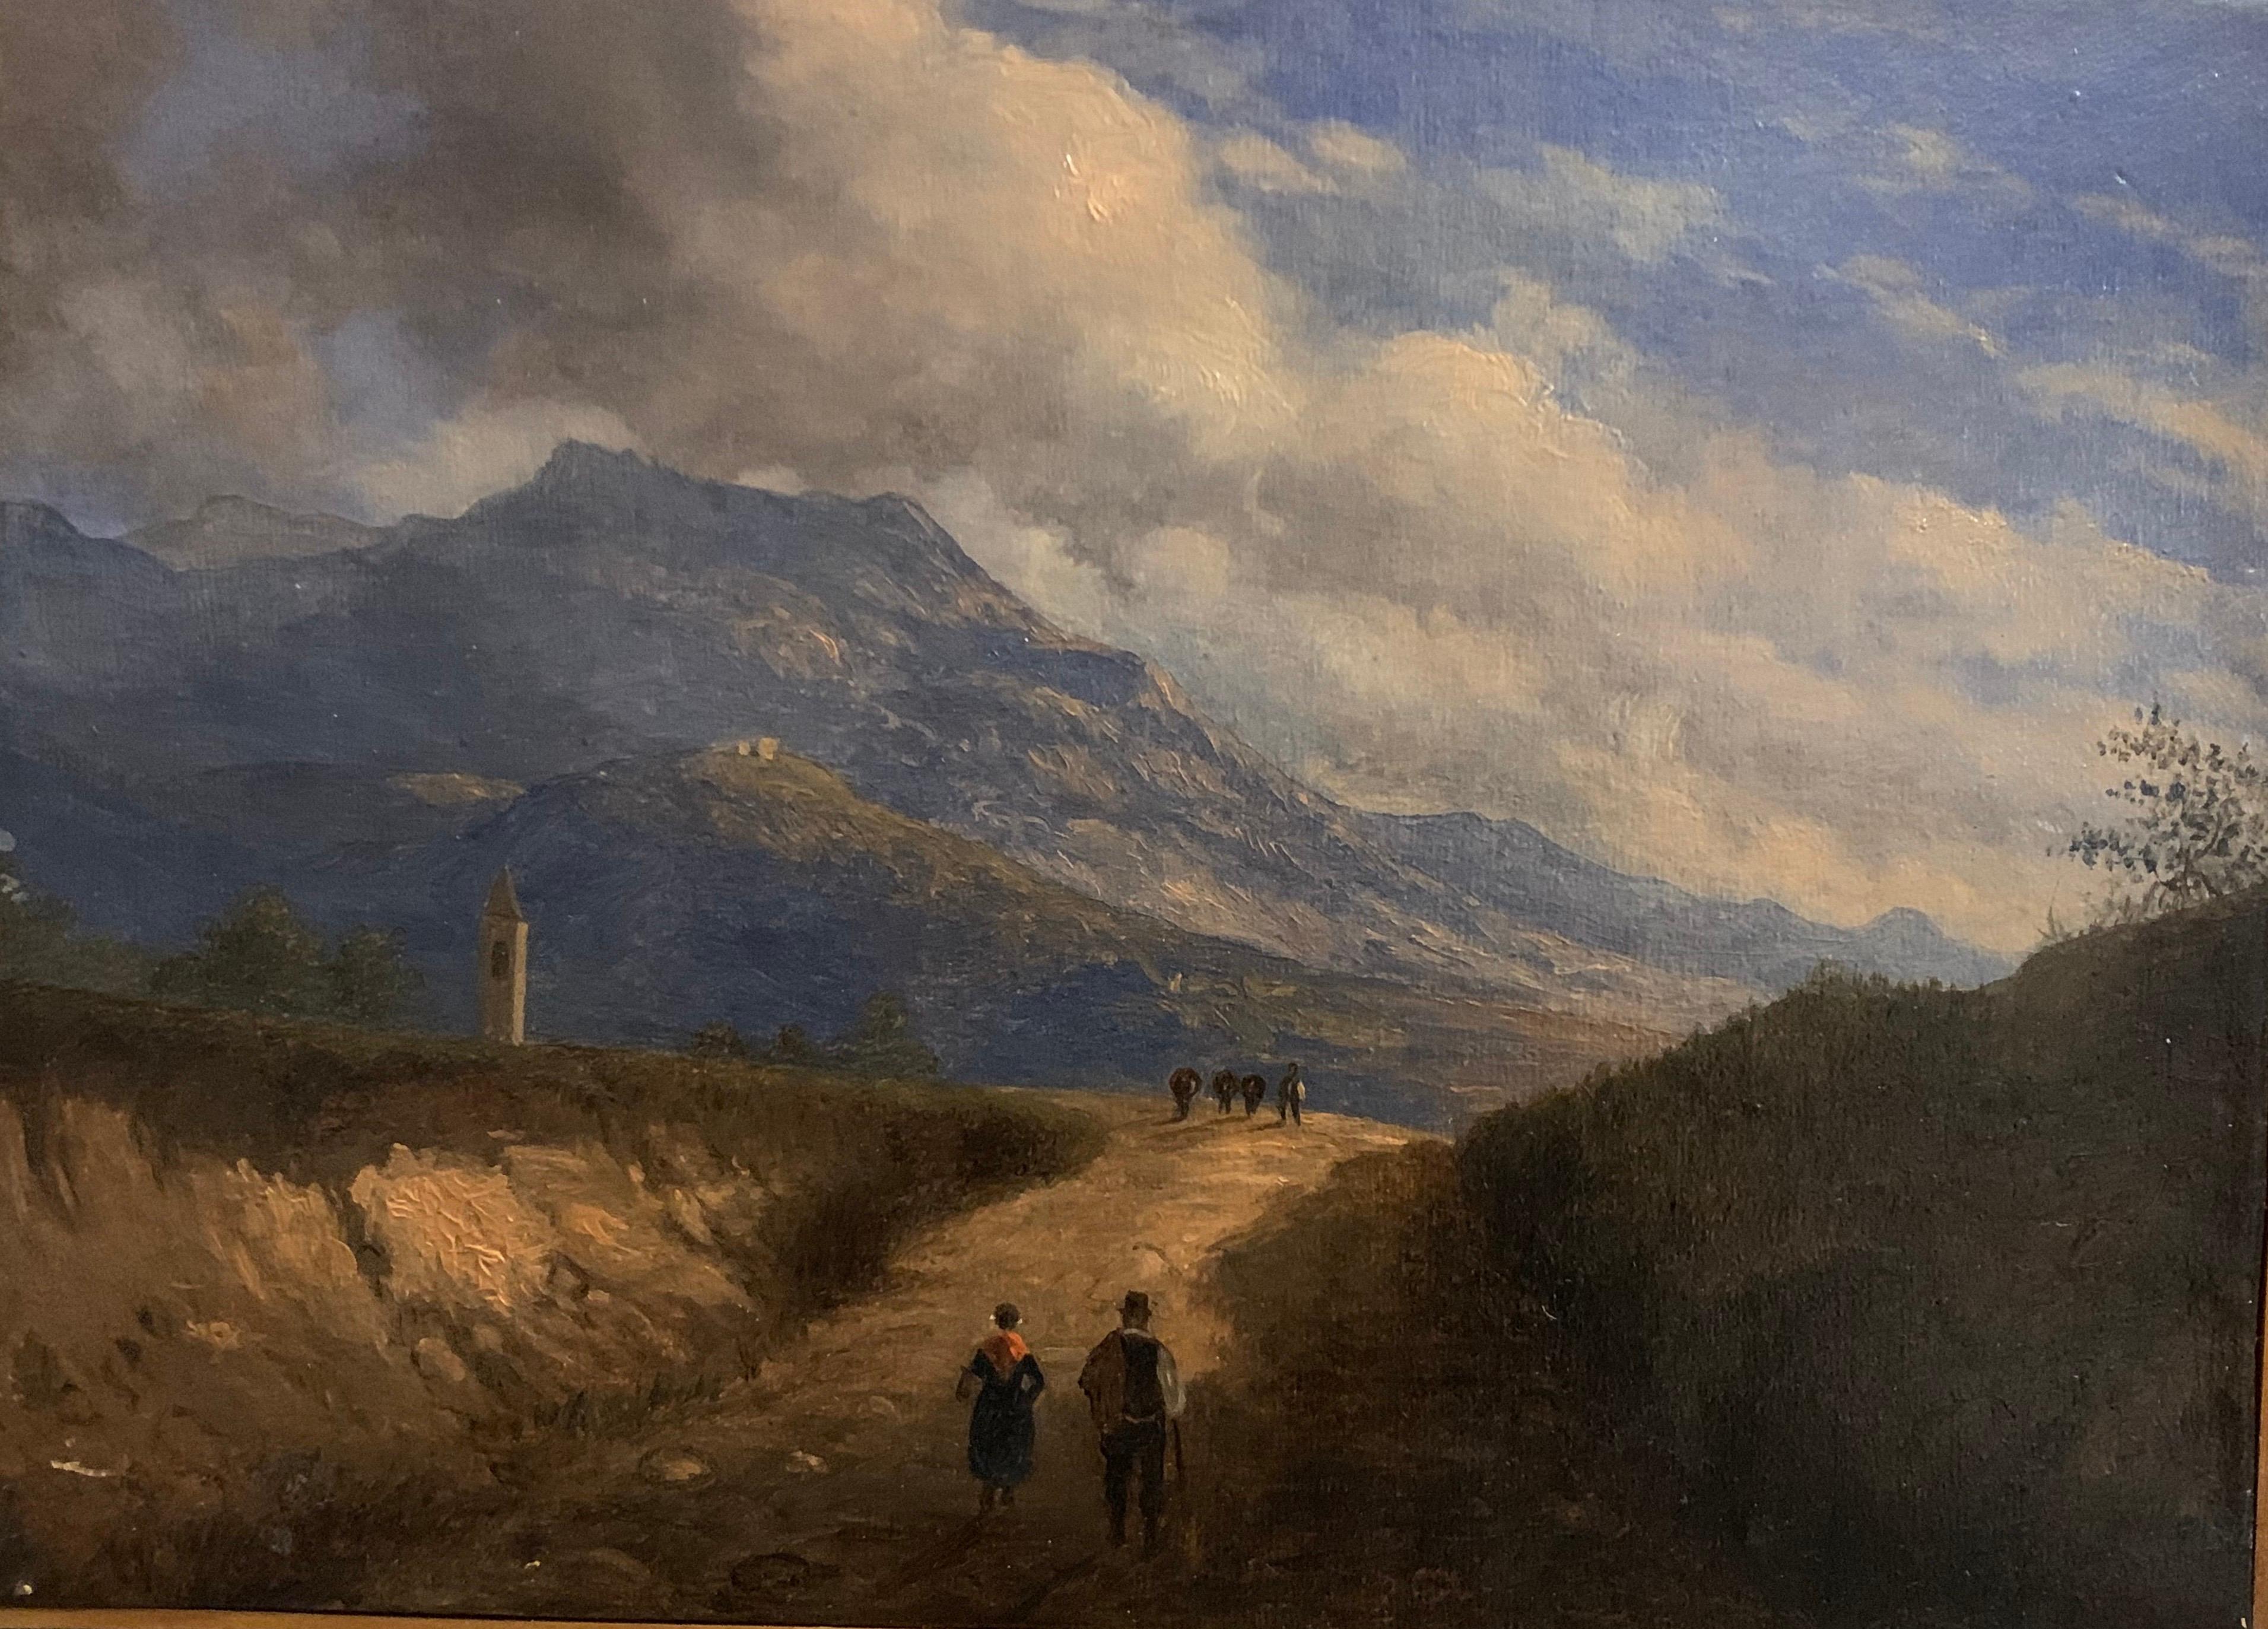 Italian antique Landscape Painting - Early 19th Century Italian Mountain Pass Landscape Travellers on Journey. Oil 